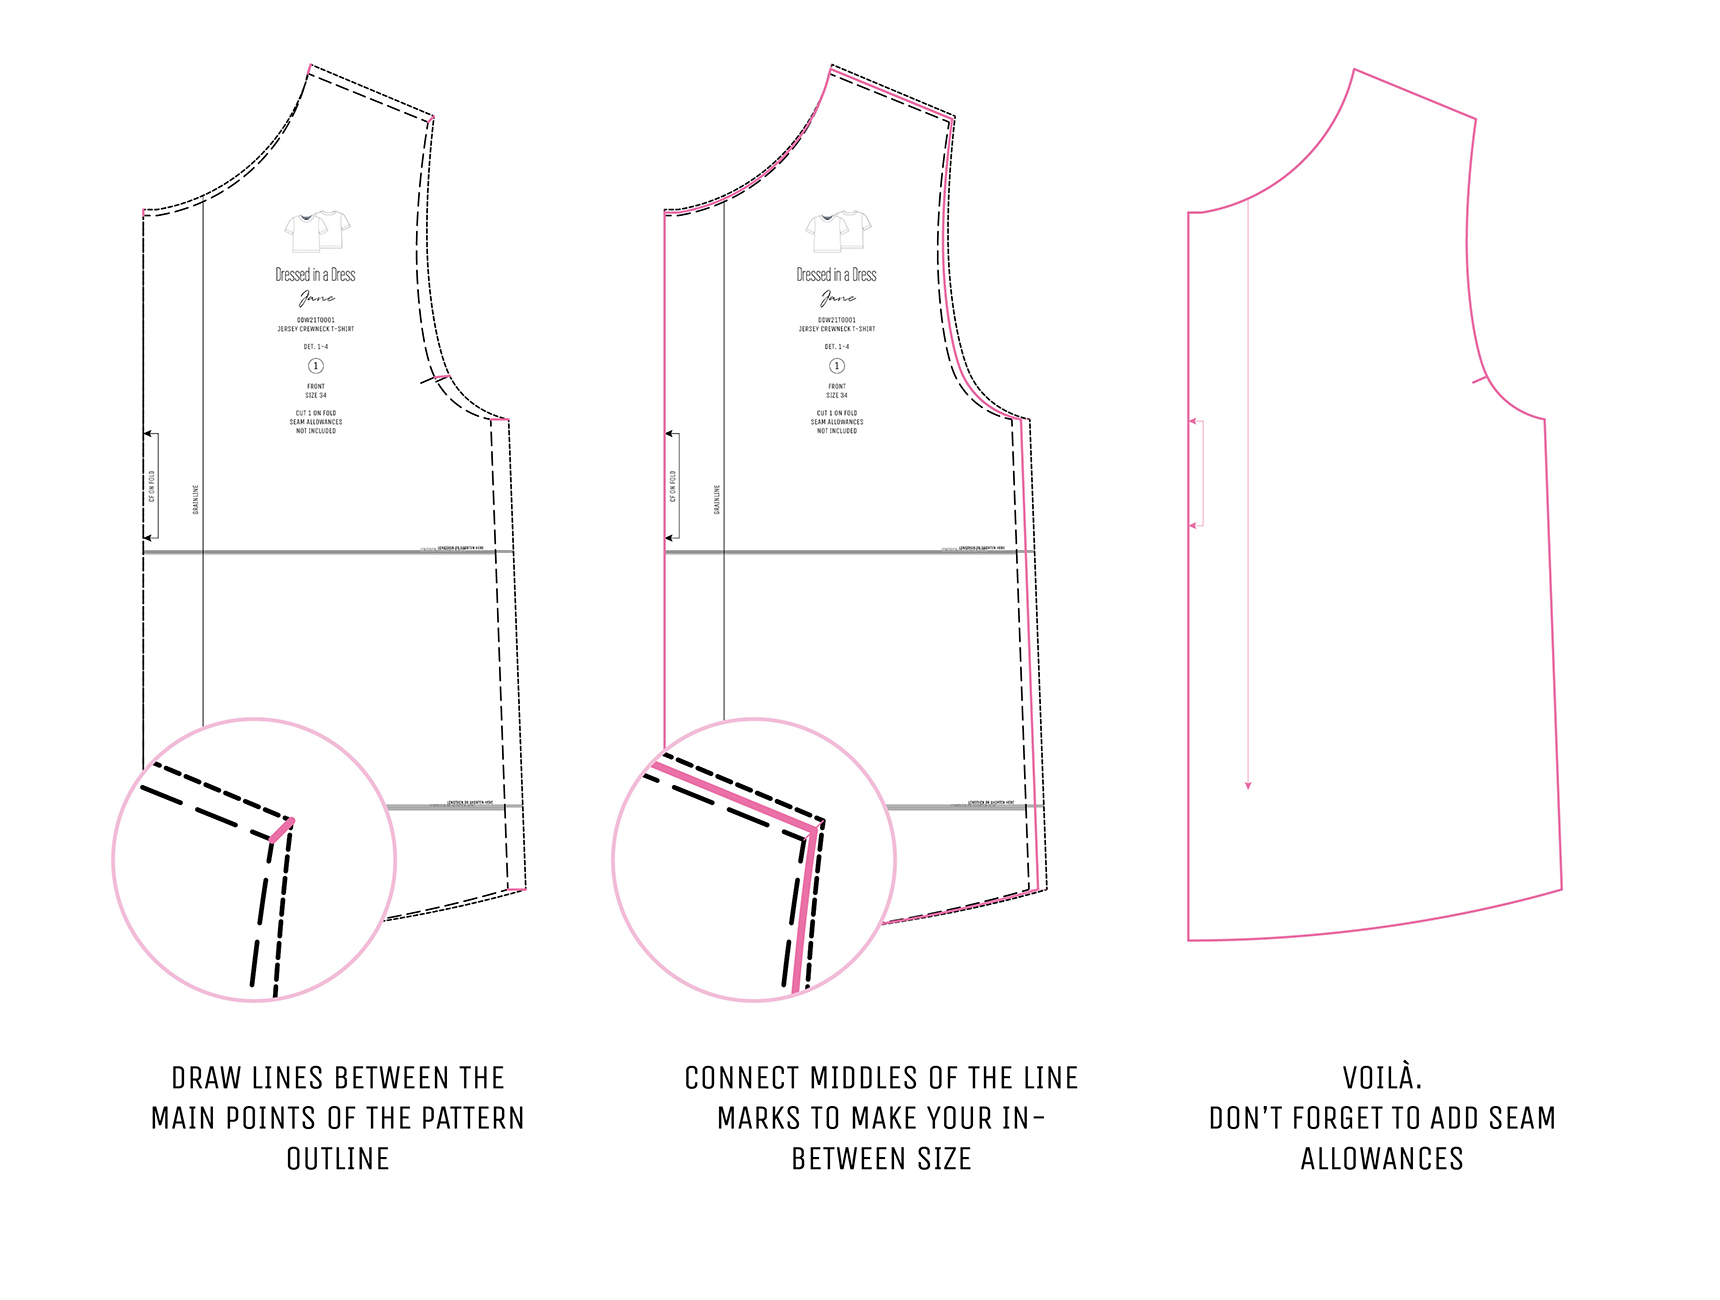 Adjusting the pattern: In-between Size